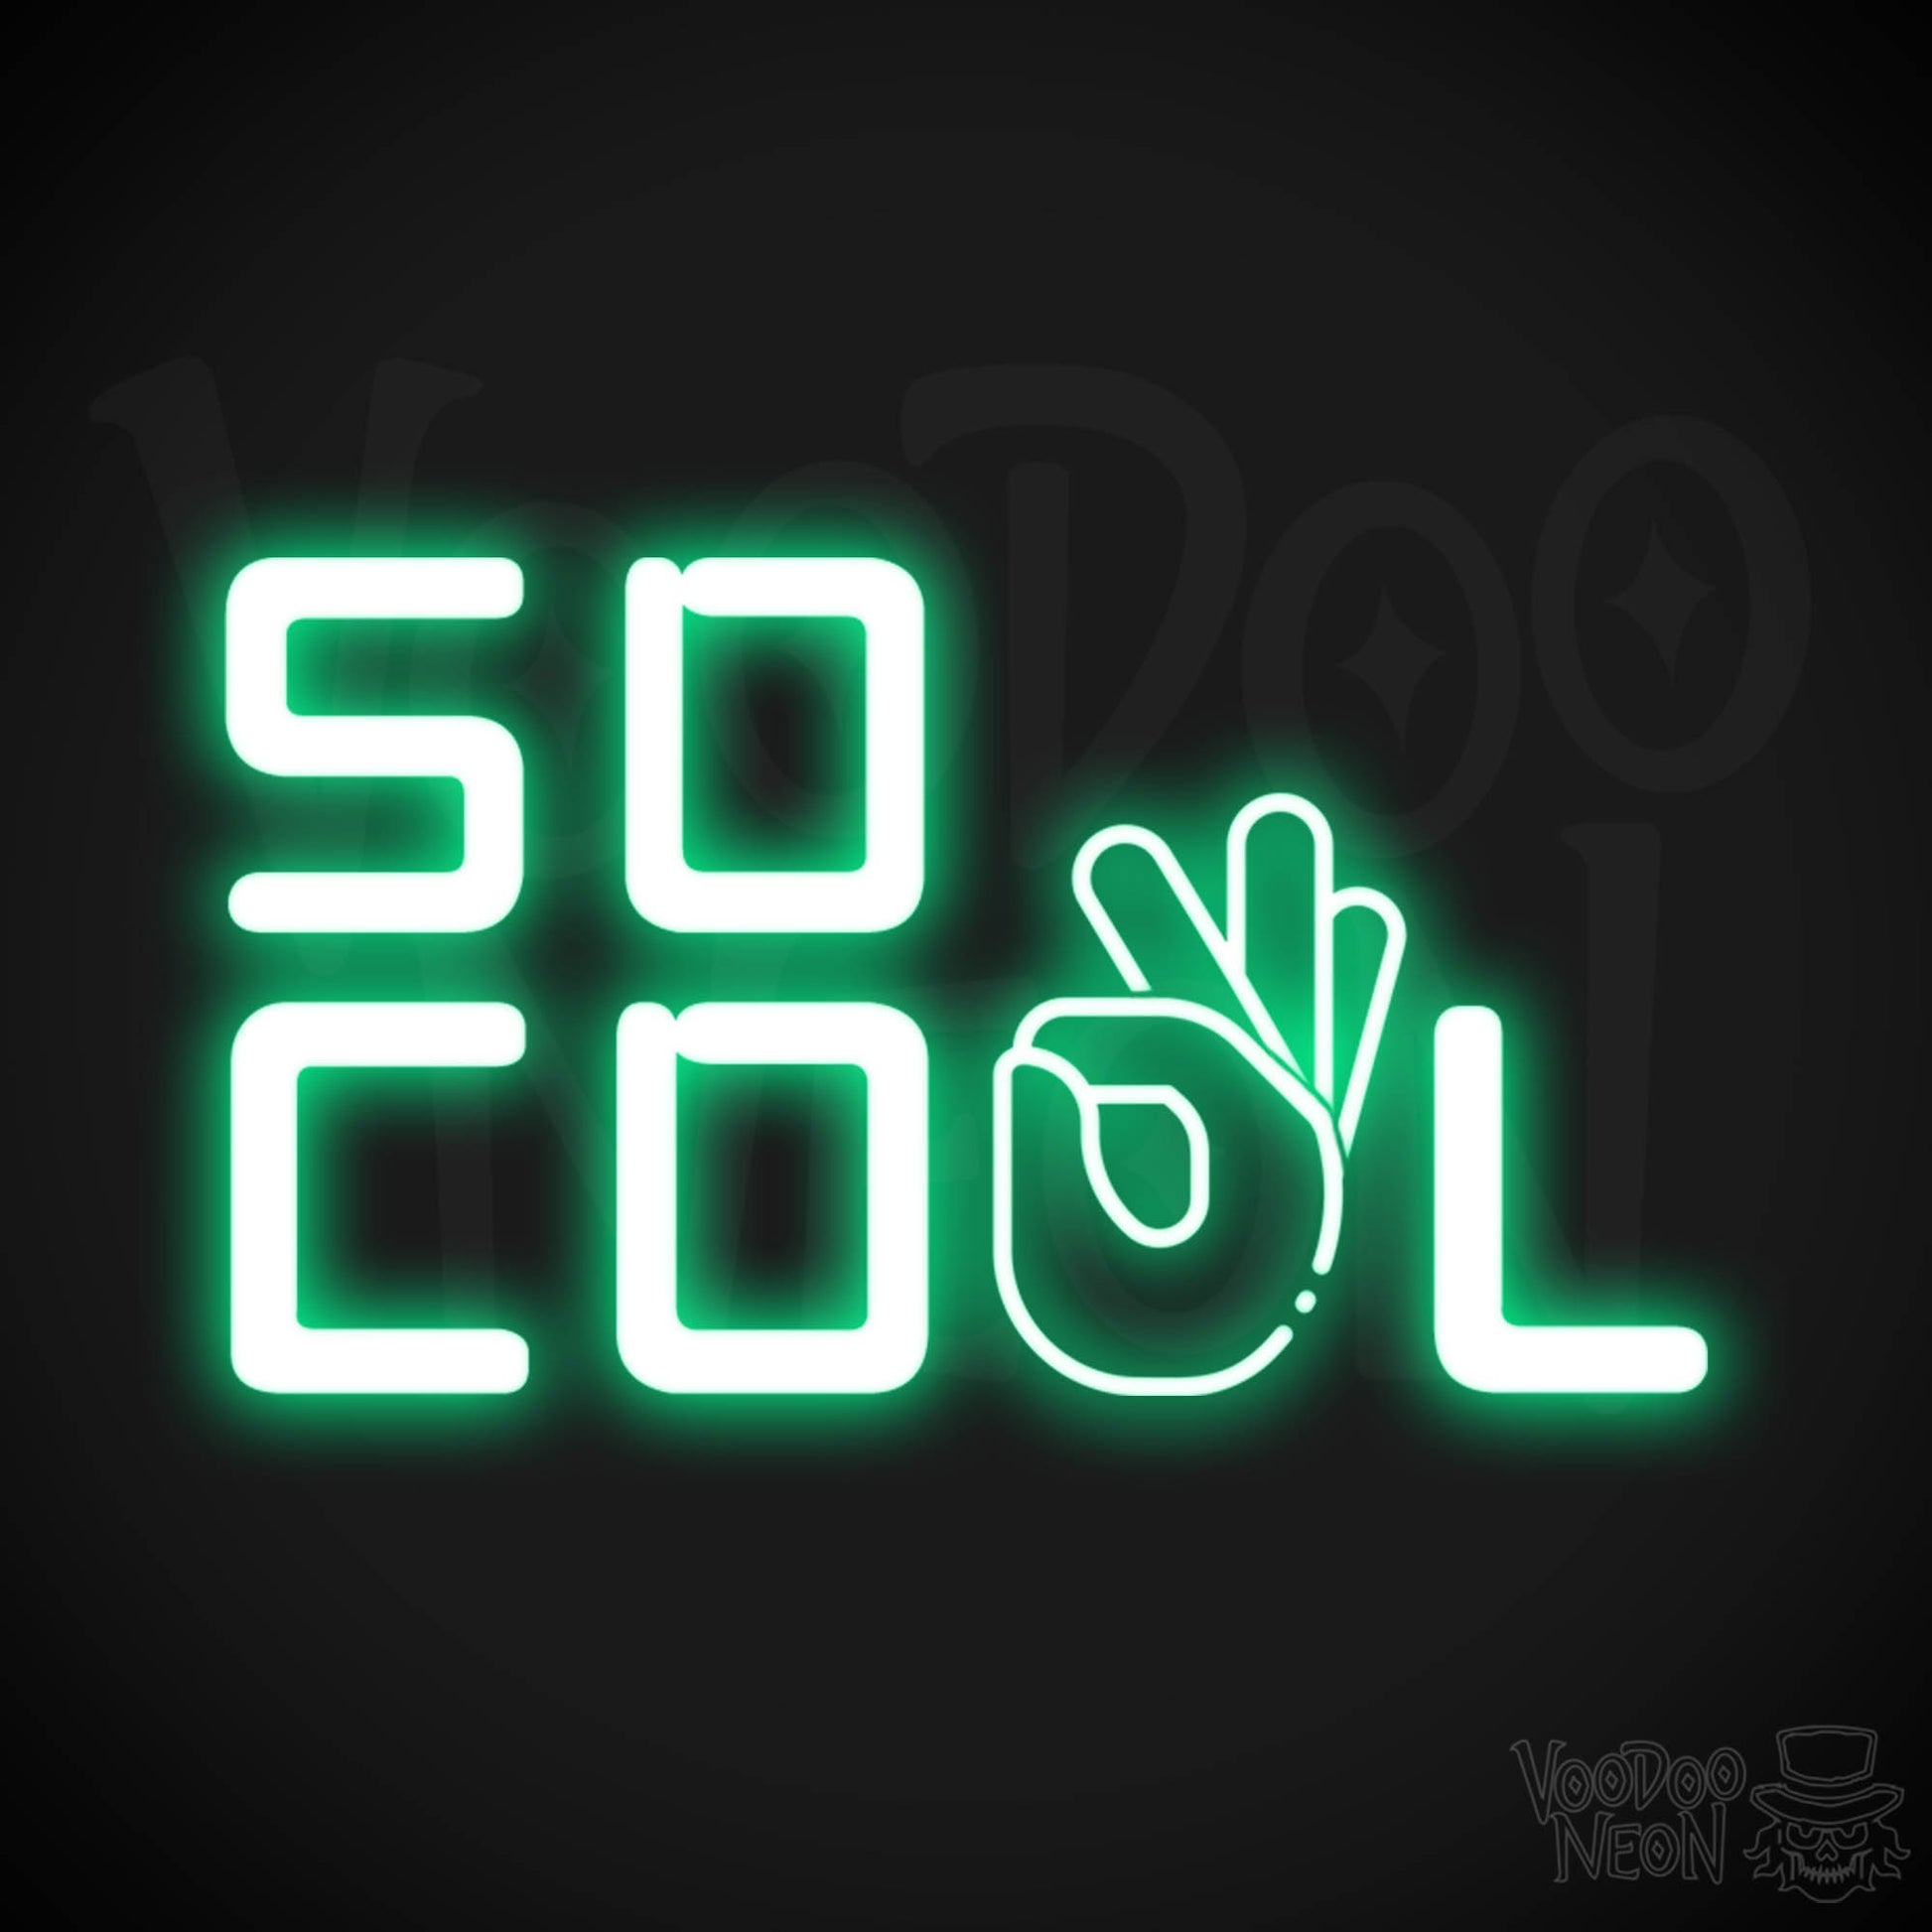 So Cool Neon Sign - Neon So Cool Sign - Cool Wall Art - Color Green